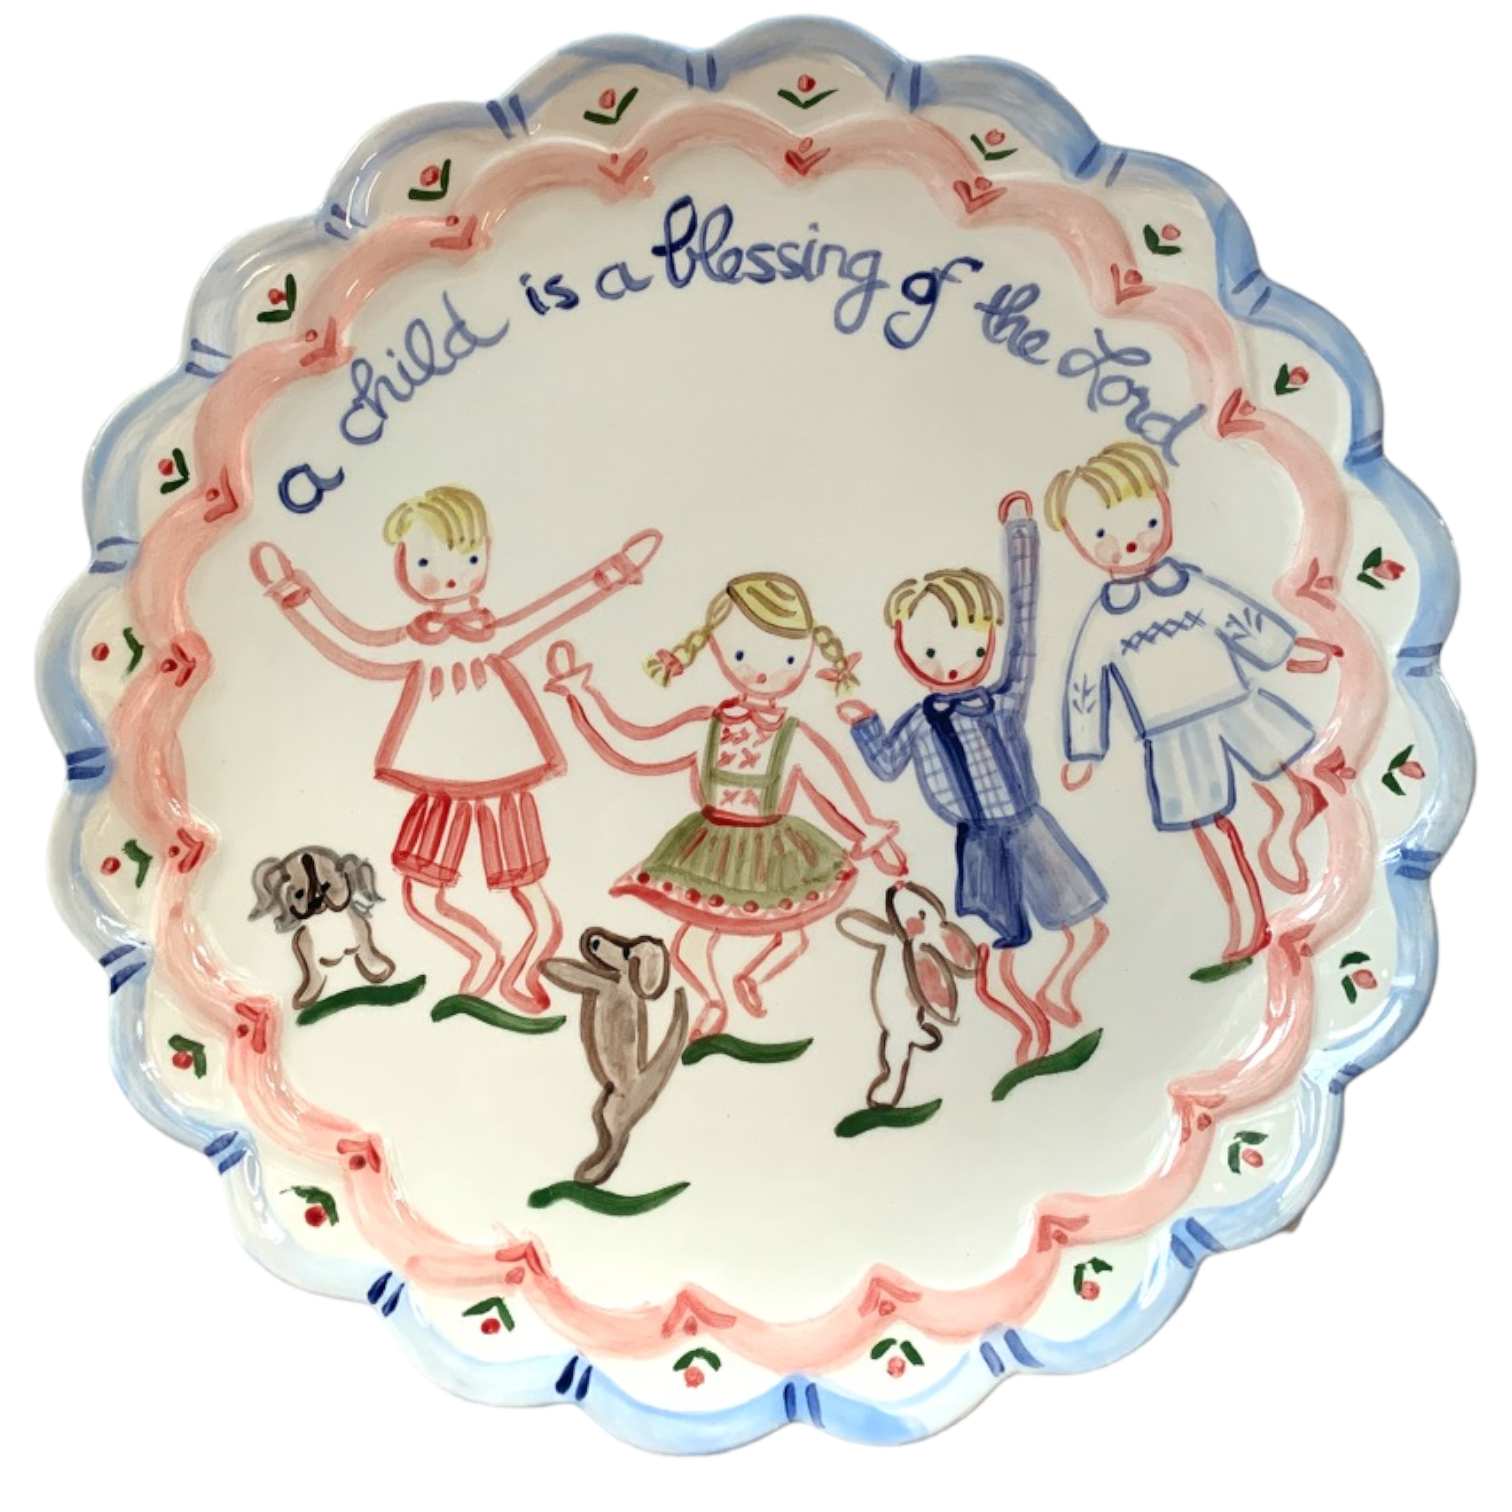 Scalloped Children Plate - A Child is a Blessing of the Lord